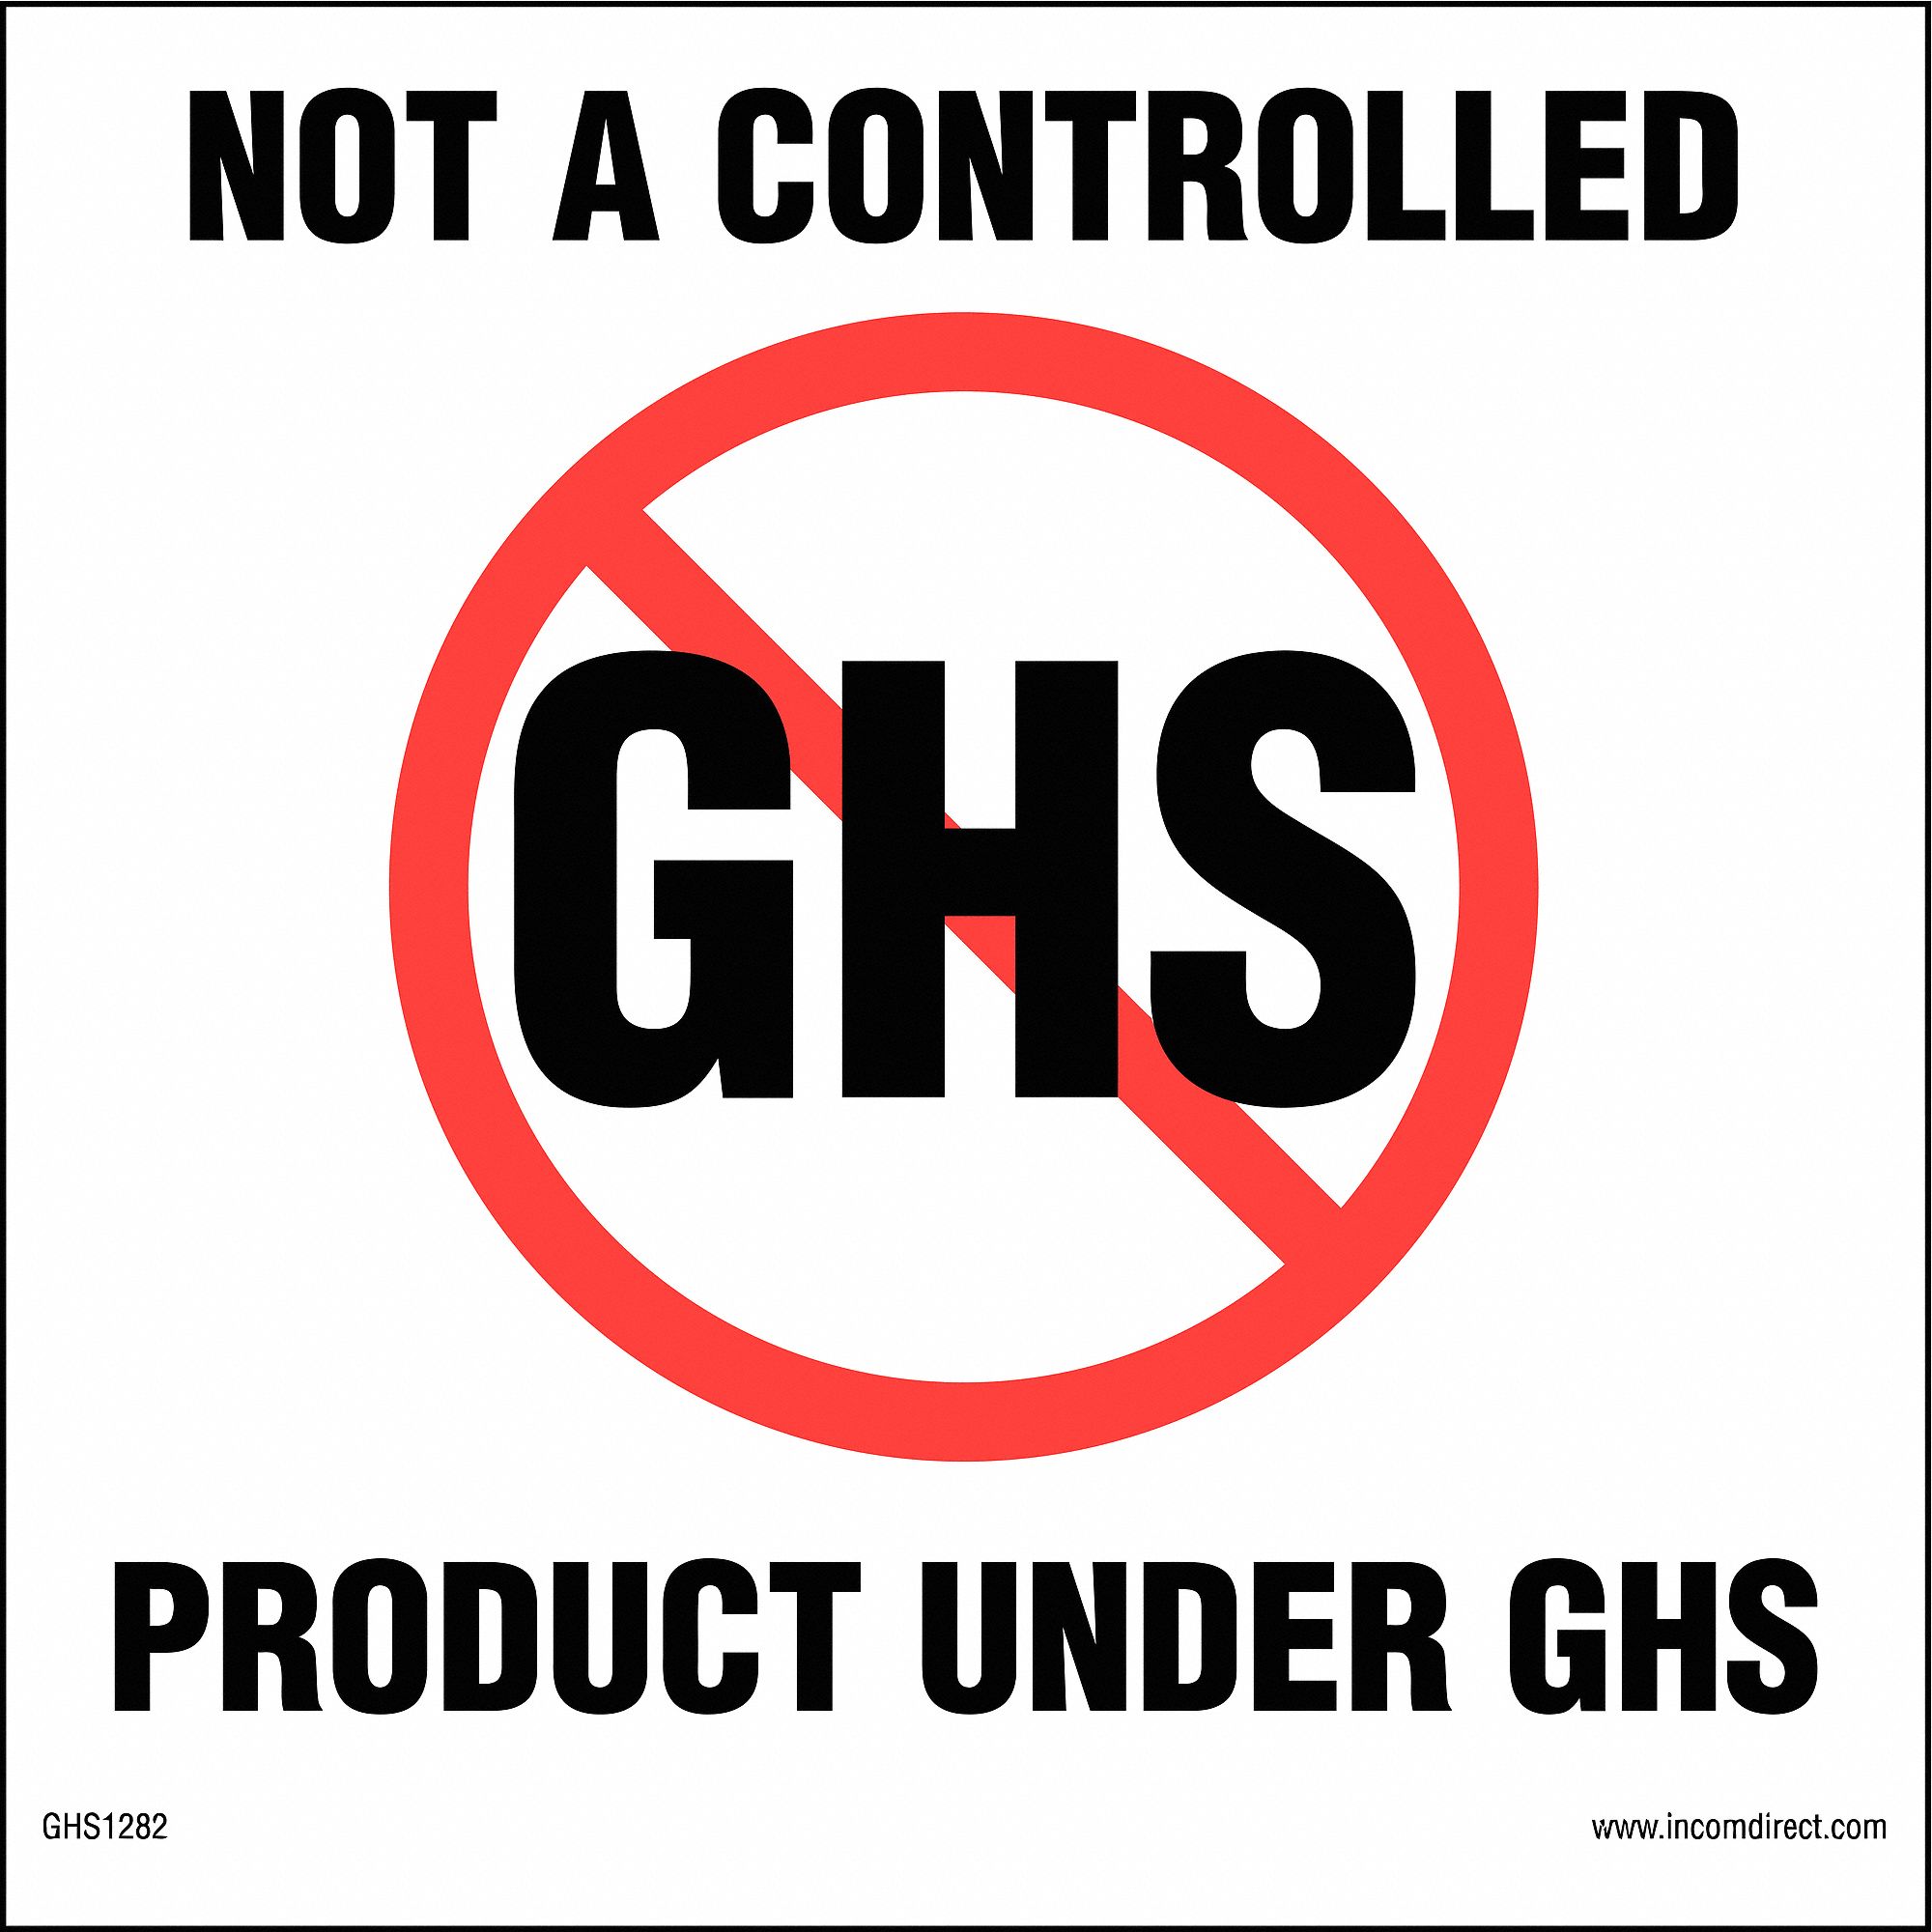 GHS SAFETY Self Adhesive Paper GHS Shipping Label, 4" Height, 4" Width   Non Hazardous and Hazardous Waste Labels   41G481|GHS1283